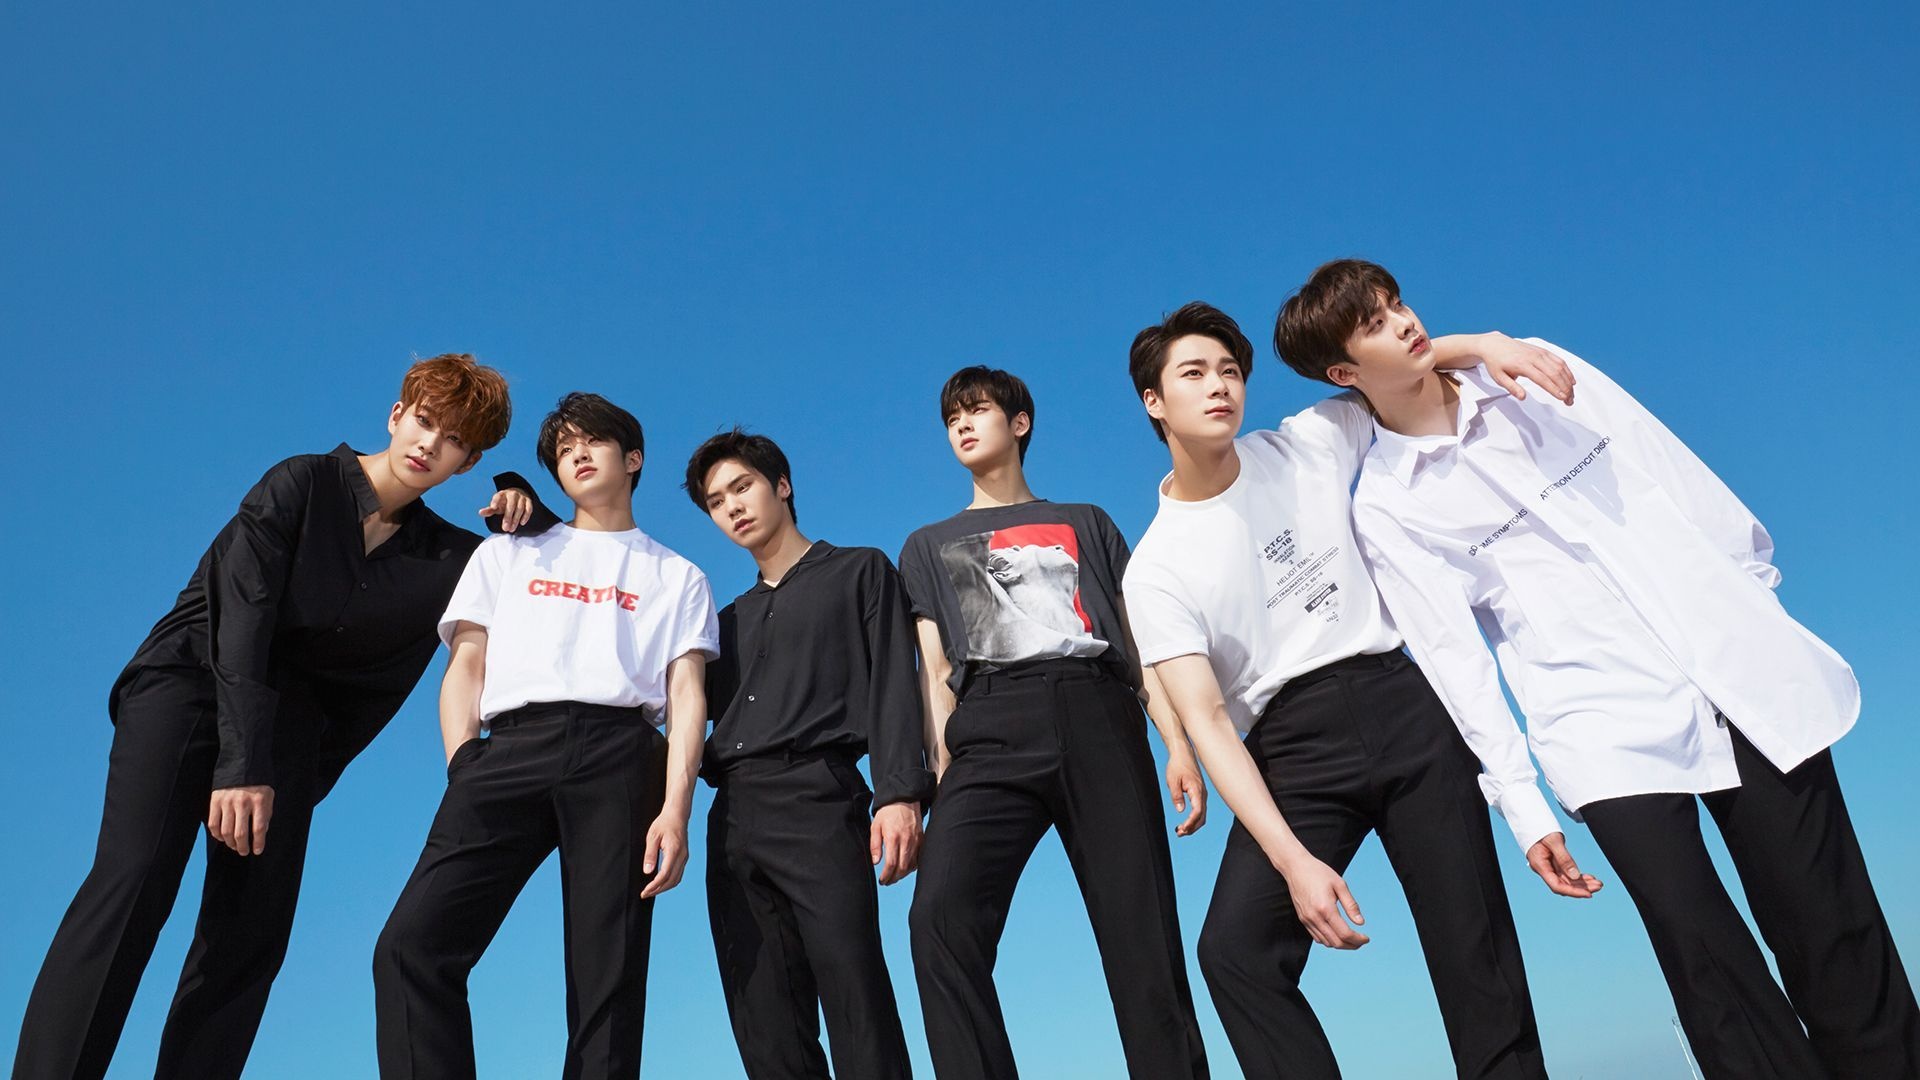 Astro, Kpop band, Computer wallpapers, High-definition images, 1920x1080 Full HD Desktop